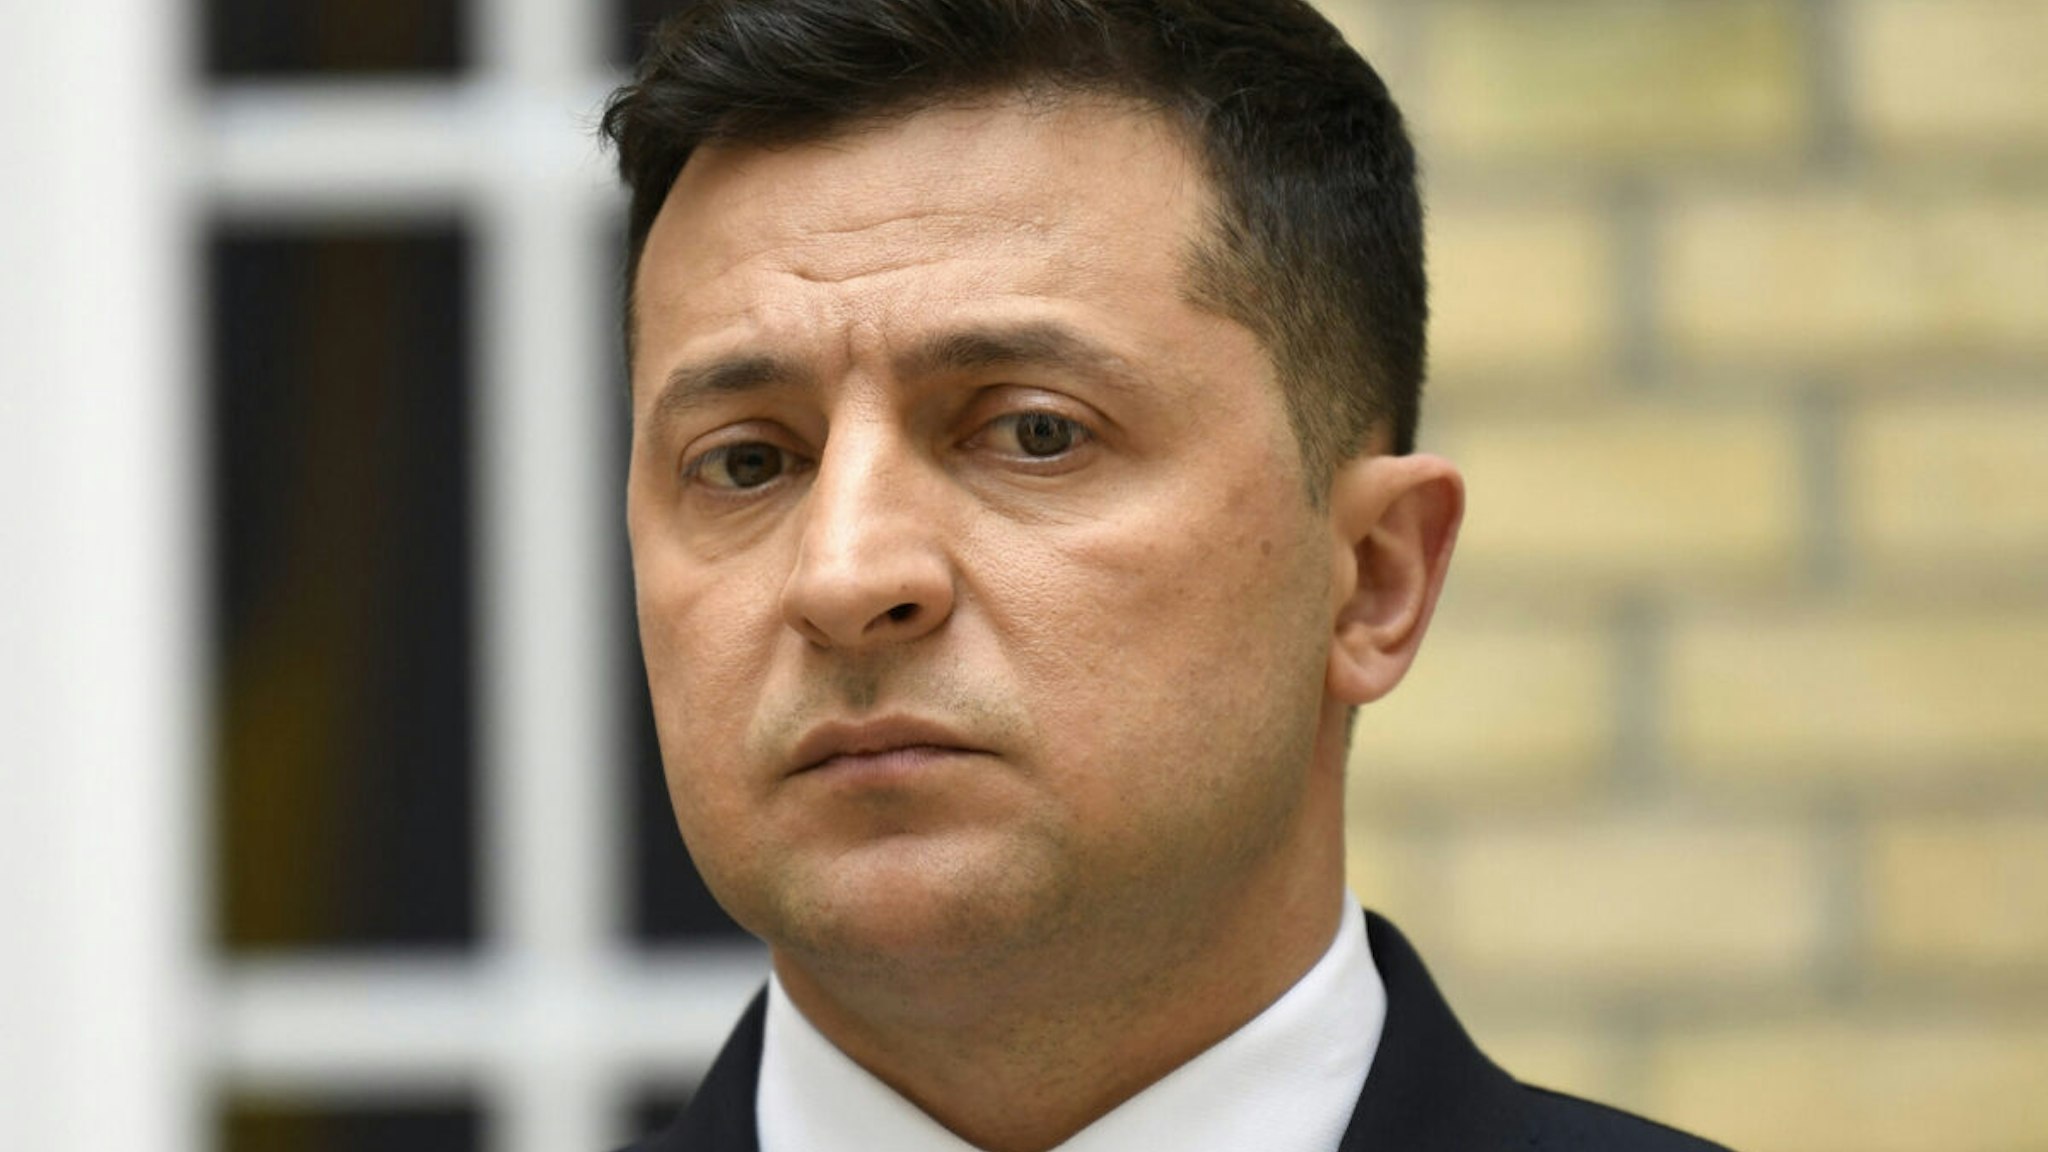 Ukrainian President Volodymyr Zelensky looks on during a press conference at the Ukraine's embassy in Paris on April 16, 2021 after a working lunch with French President